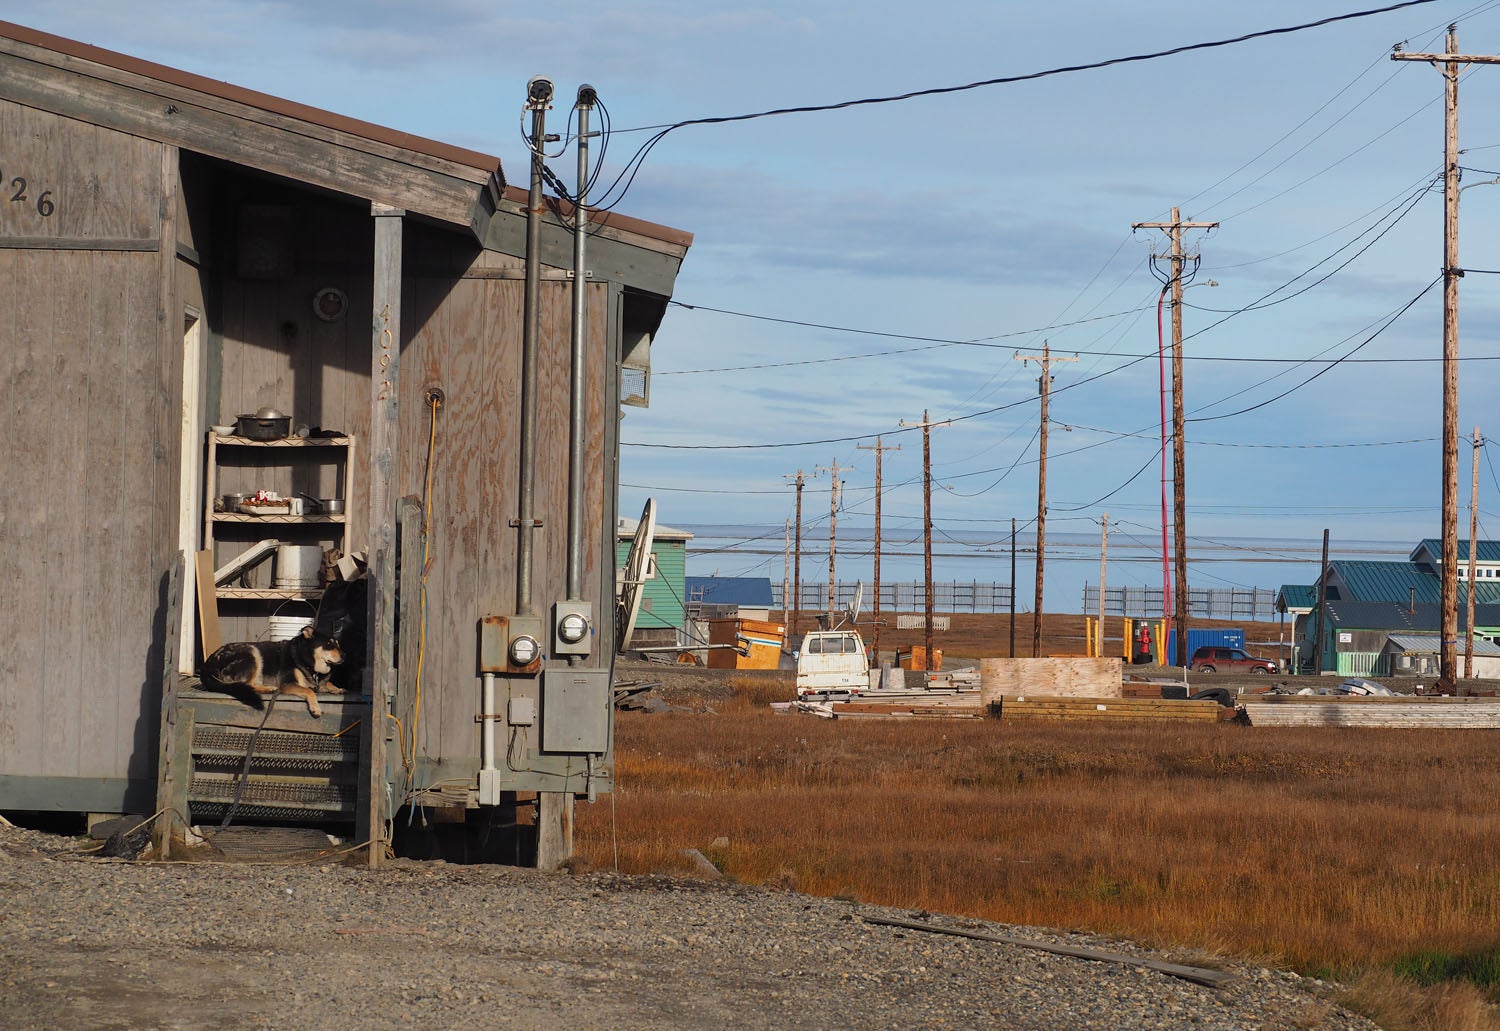 The Inupiat-Eskimo village of Kaktovik is struggling to manage an increase of polar bears coming to town